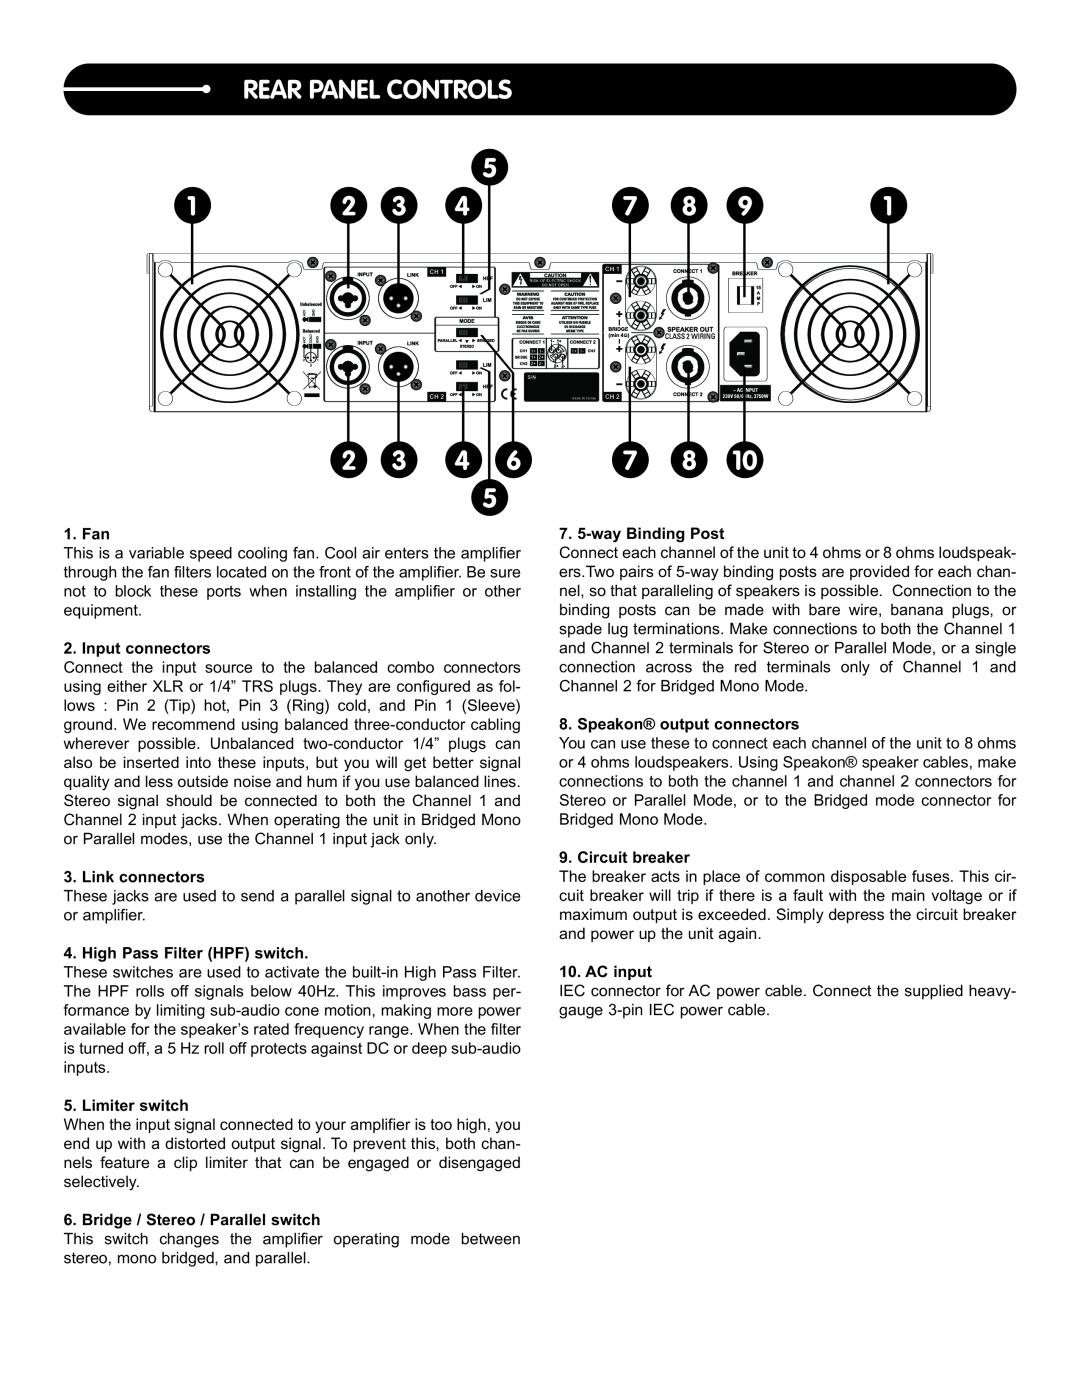 Stanton A.2800 Rear Panel Controls, Fan, Input connectors, Link connectors, High Pass Filter HPF switch, Limiter switch 